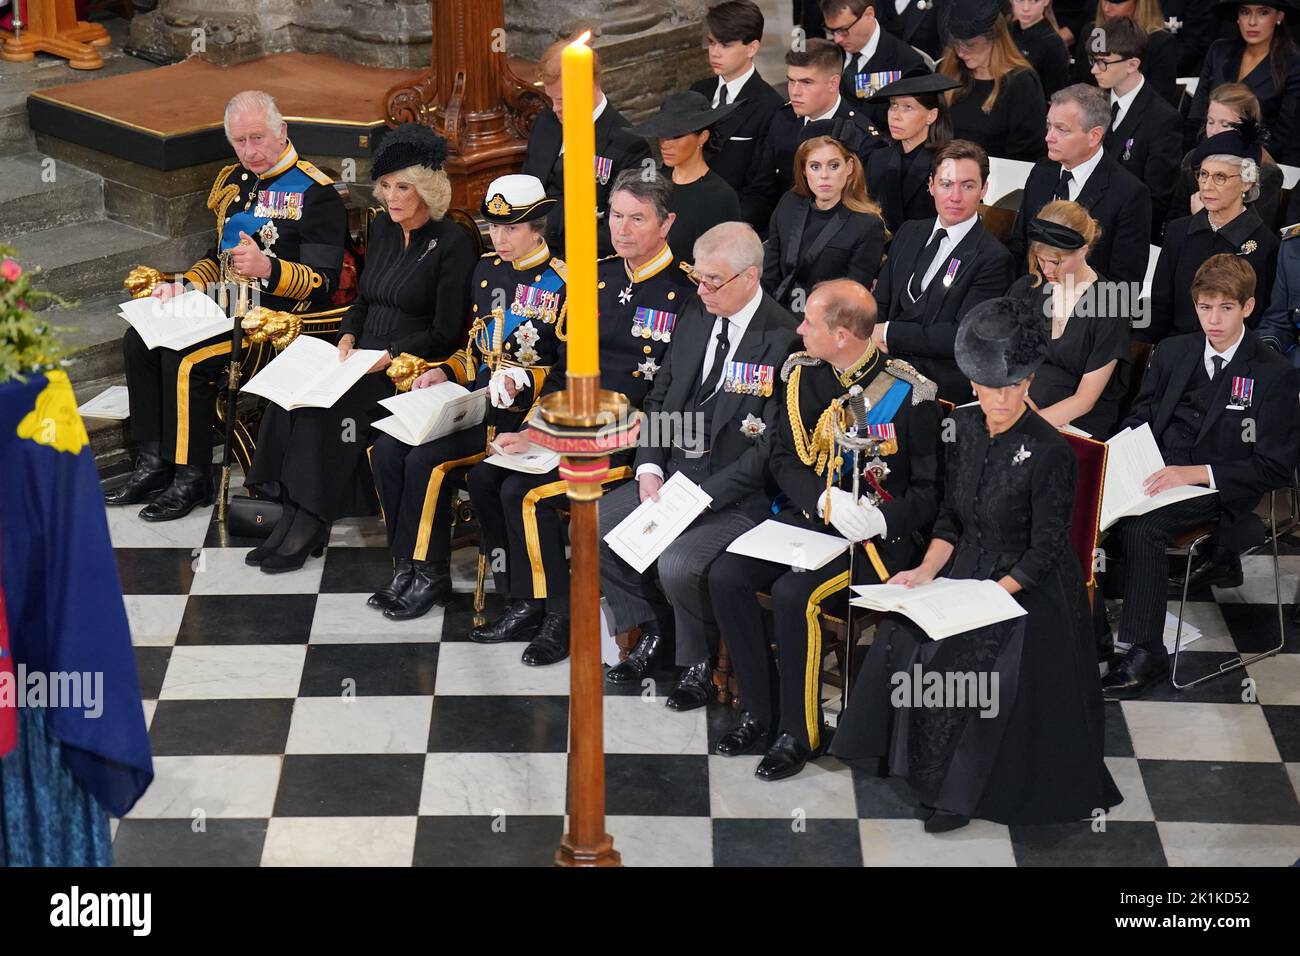 (front row) King Charles III, the Queen Consort, the Princess Royal, Vice Admiral Sir Tim Laurence, the Duke of York, the Earl of Wessex, the Countess of Wessex, (second row) the Duke of Sussex, the Duchess of Sussex, Princess Beatrice, Edoardo Mapelli Mozzi and Lady Louise Windsor and James, Viscount Severn, and (third row) Samuel Chatto, Arthur Chatto, Lady Sarah Chatto, Daniel Chatto and the Duchess of Gloucester in front of the coffin of Queen Elizabeth II during her State Funeral at the Abbey in London. Picture date: Monday September 19, 2022. Stock Photo